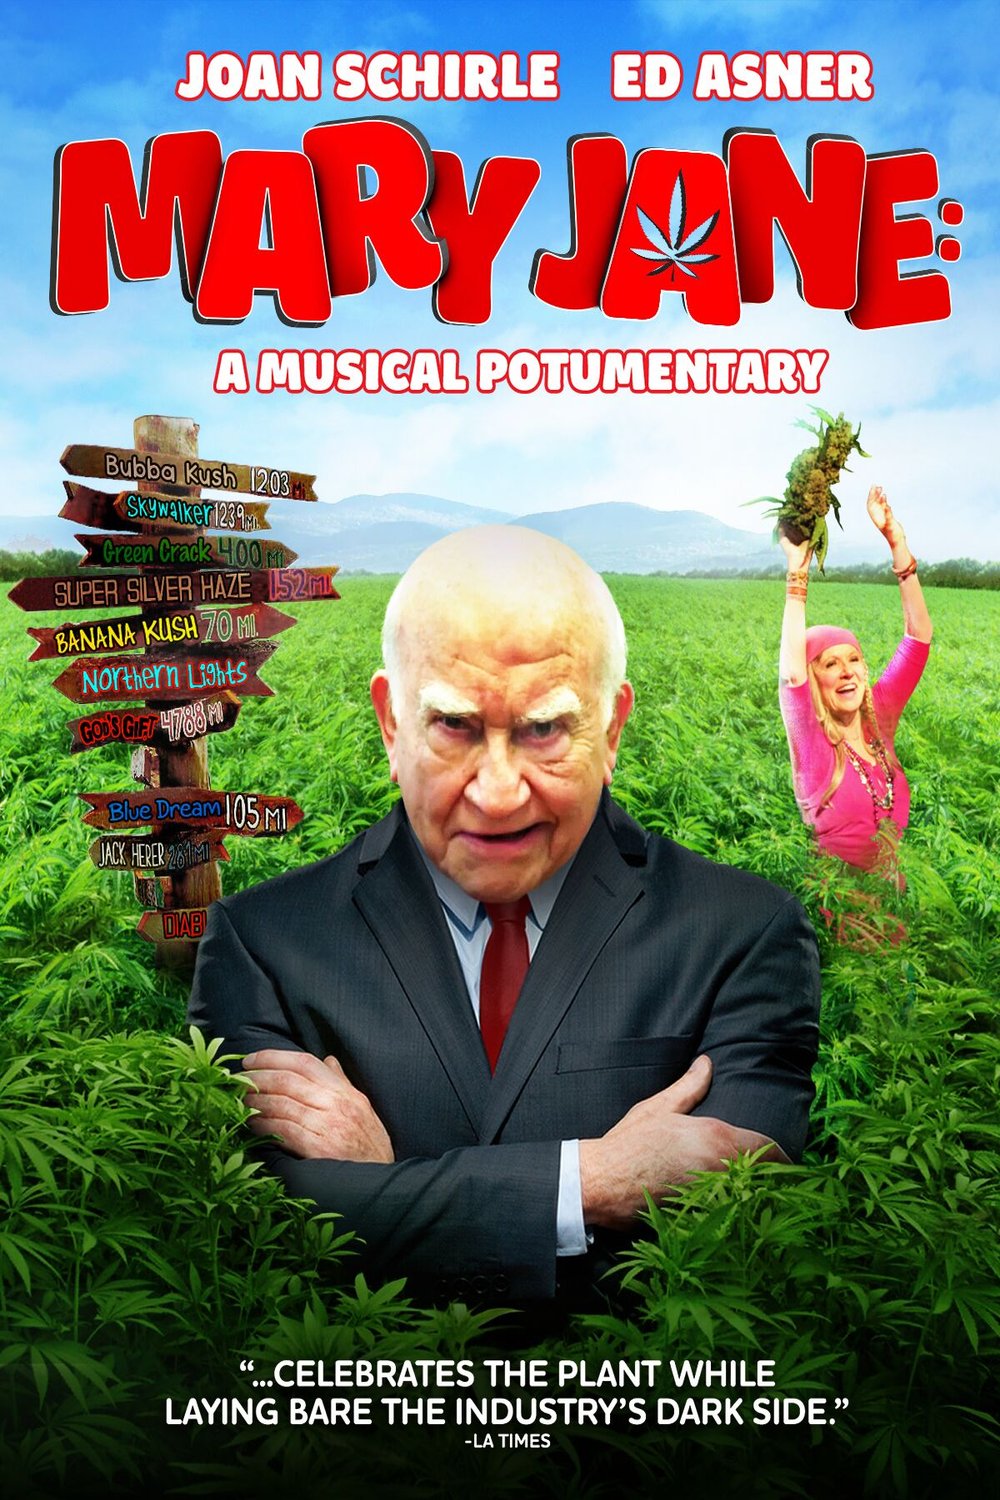 L'affiche du film Mary Jane: A Musical Potumentary